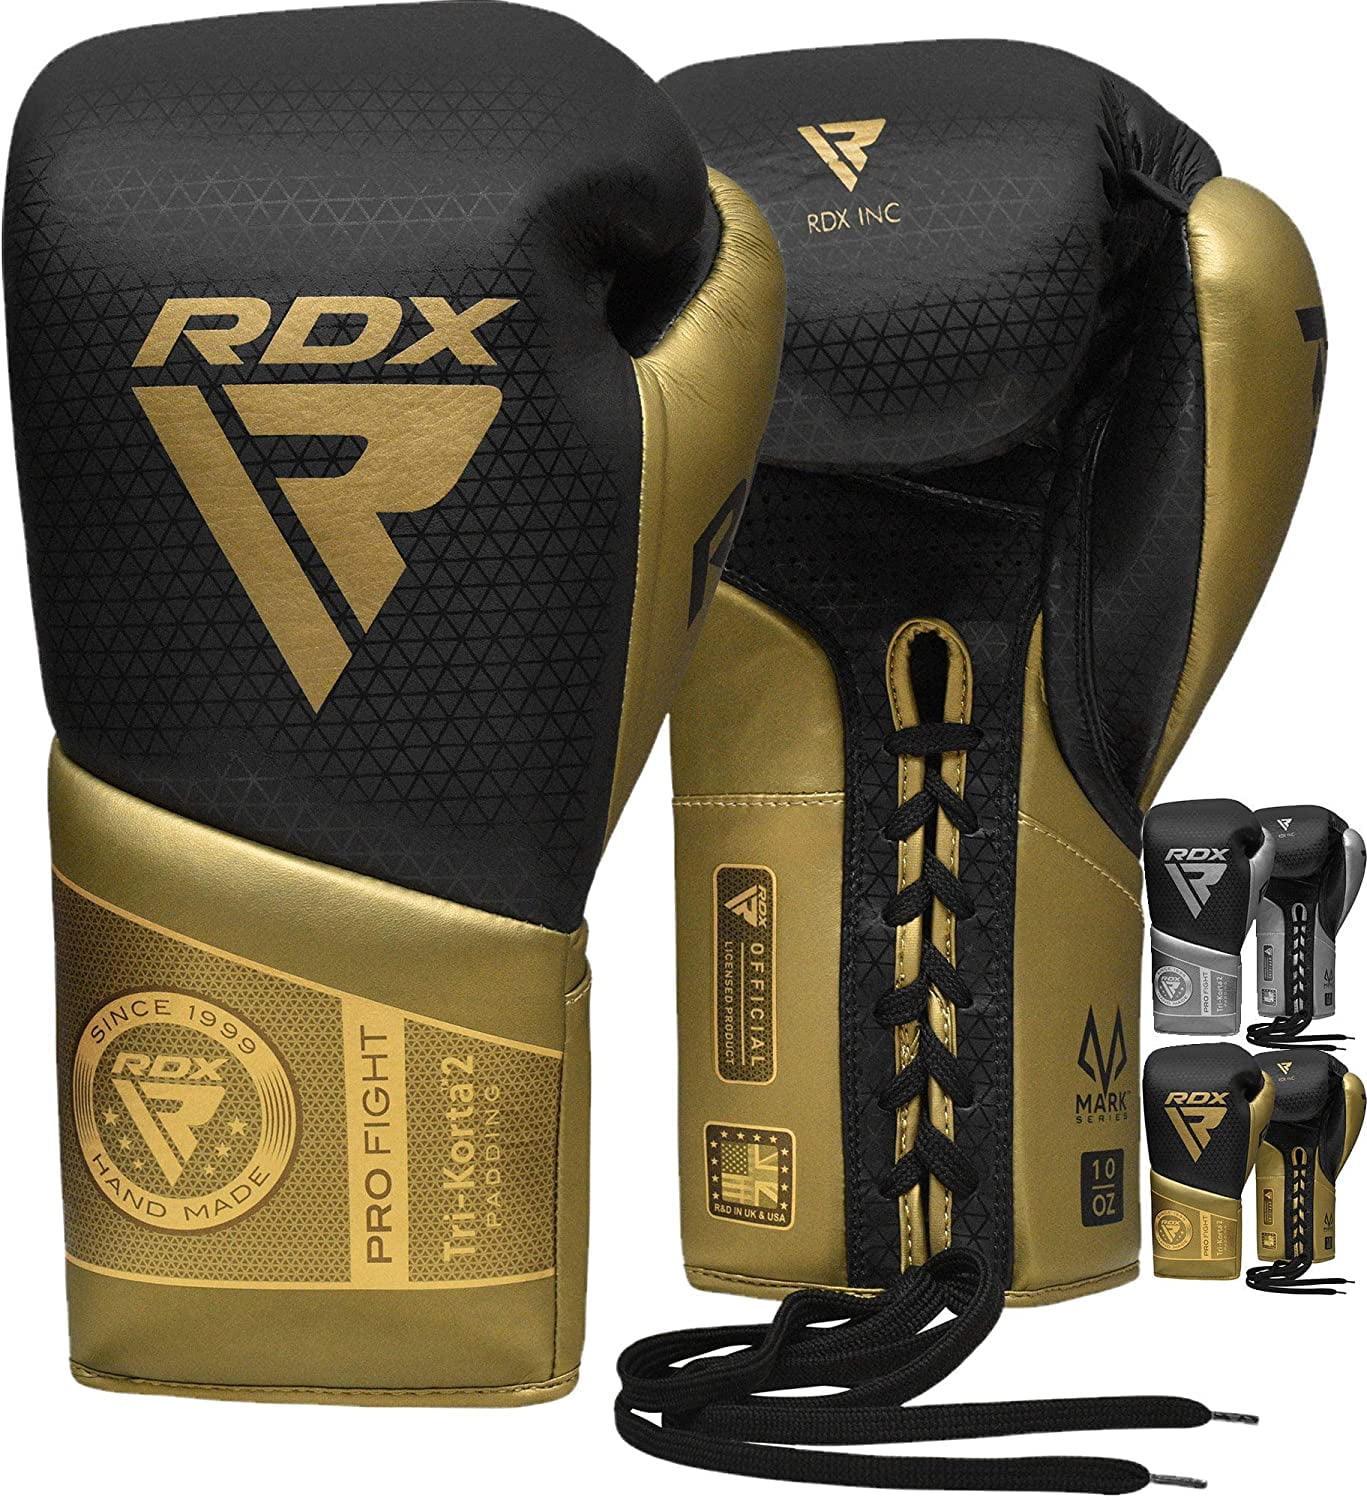 Maxx Boxing Gloves Rex Leather Fight Punch Bag Training MMA Grappling Muay Thai 